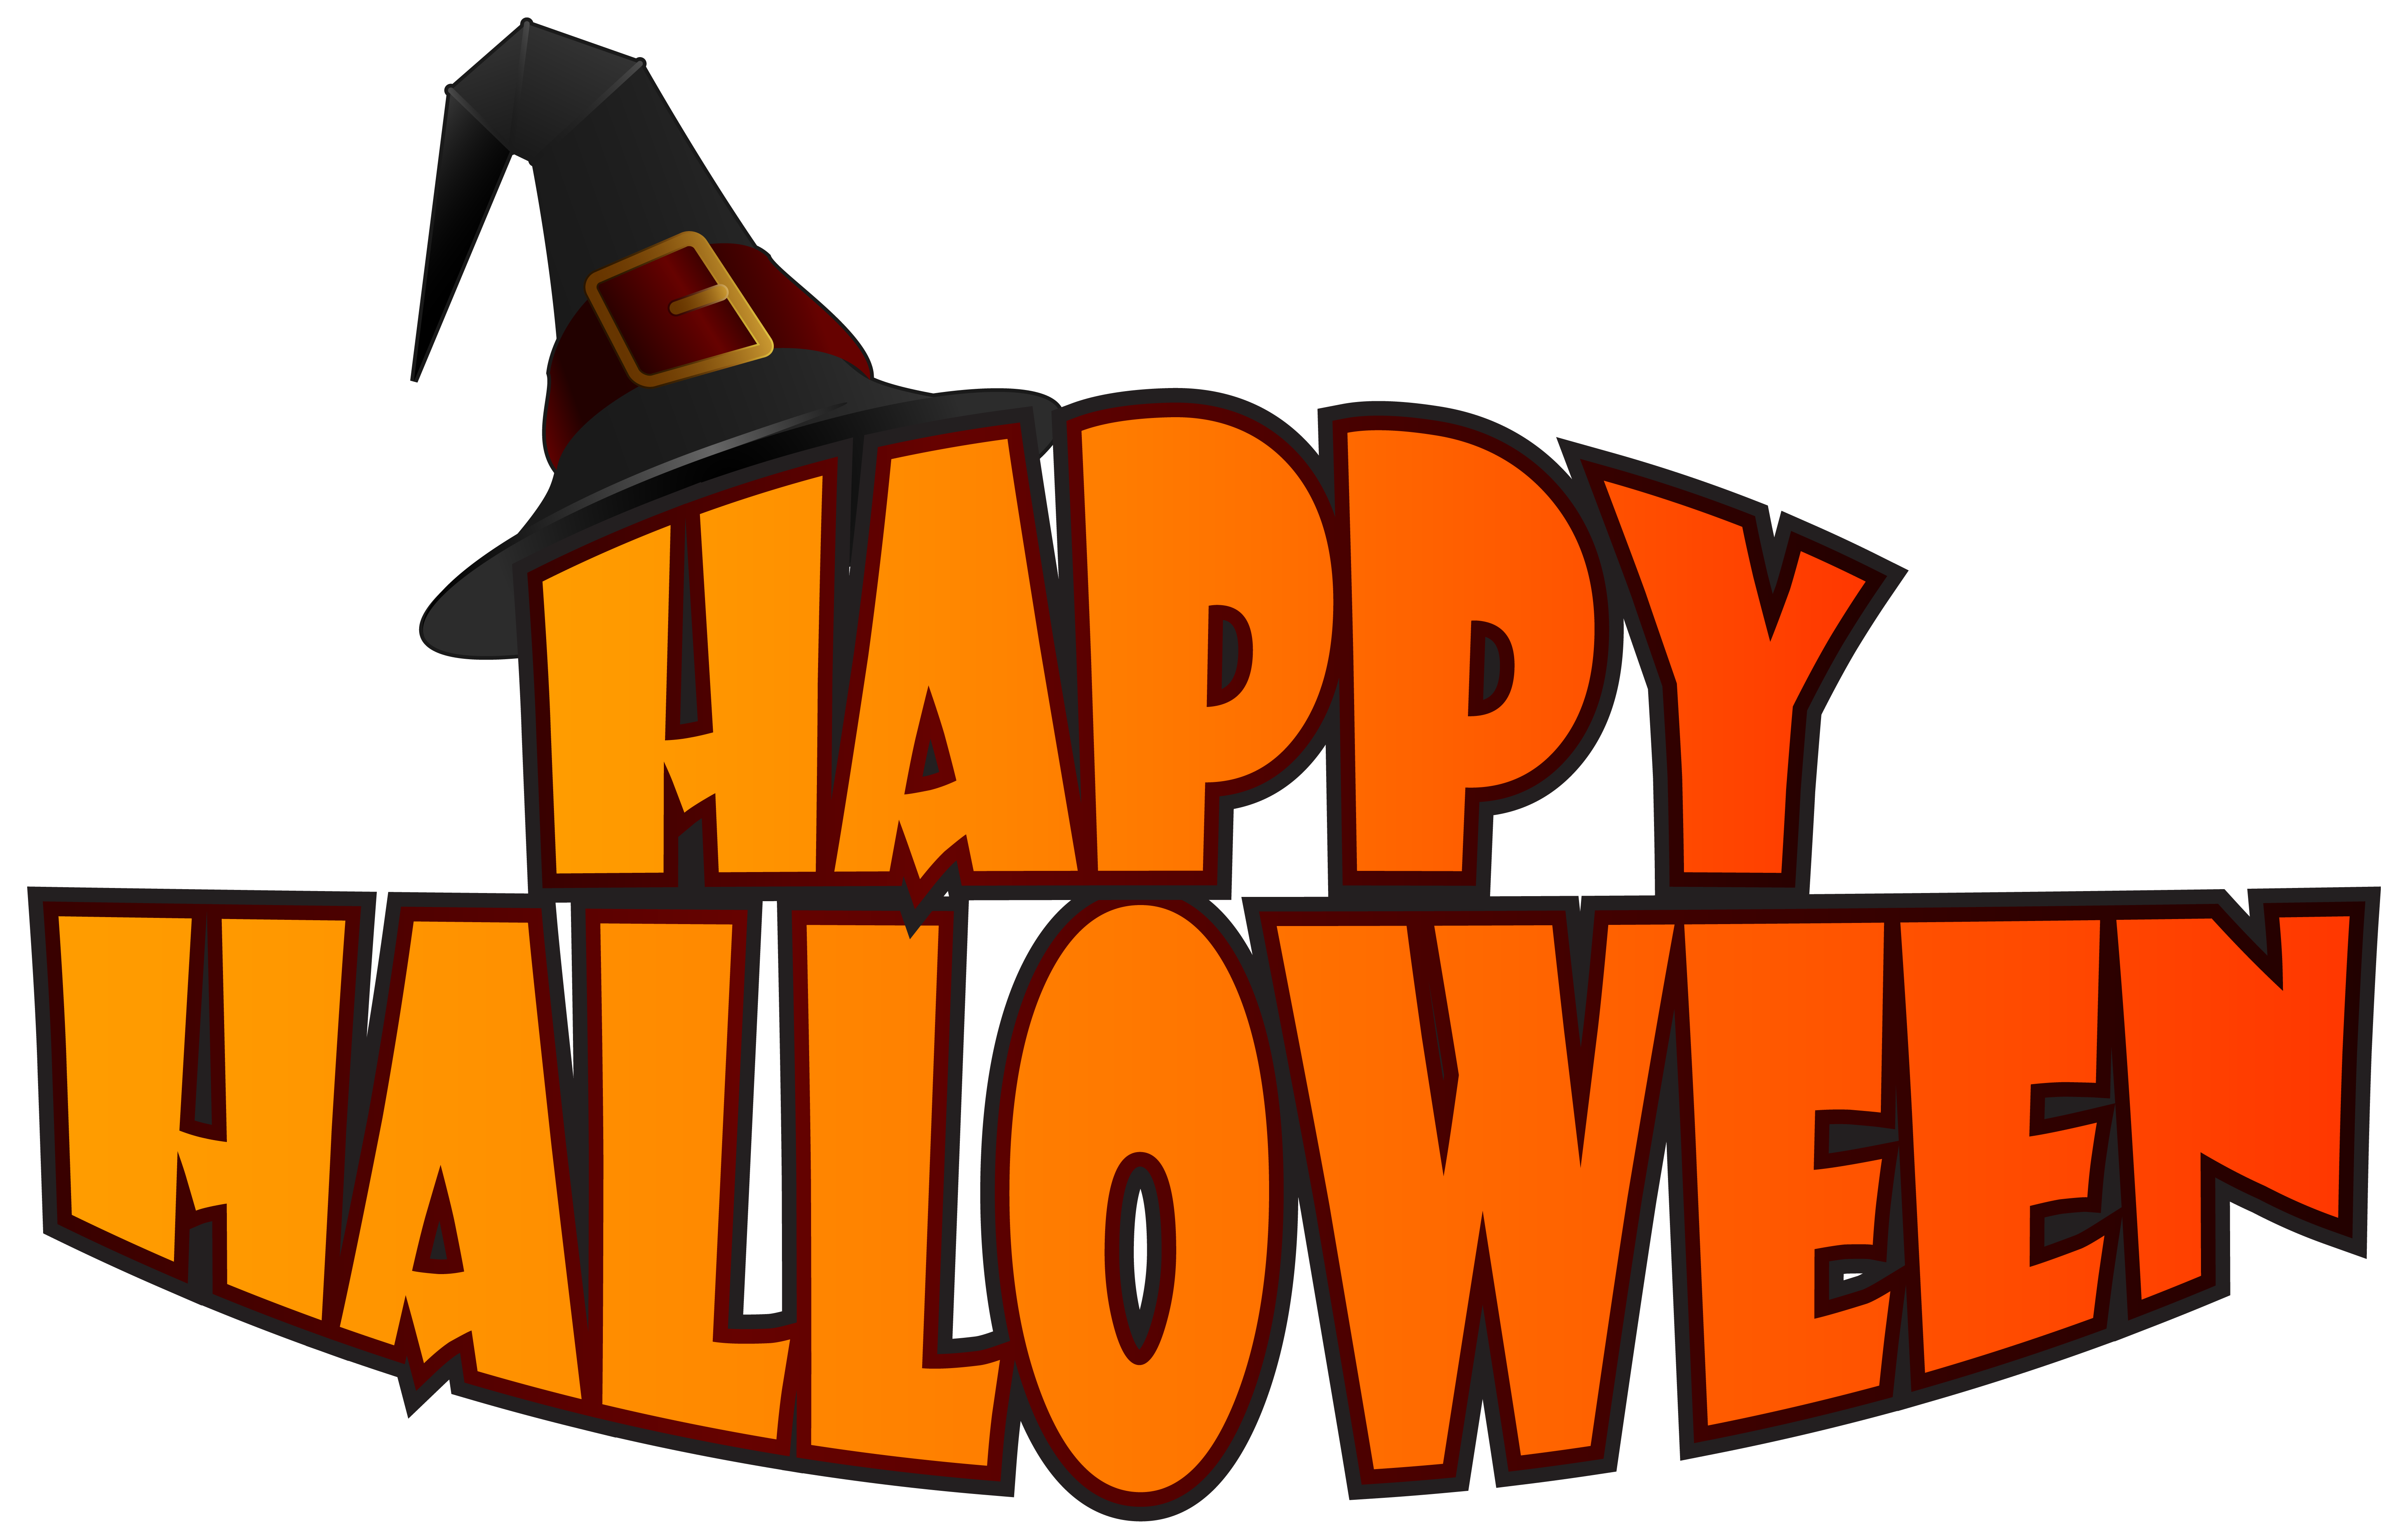 Halloween with witch hat. Exercising clipart happy